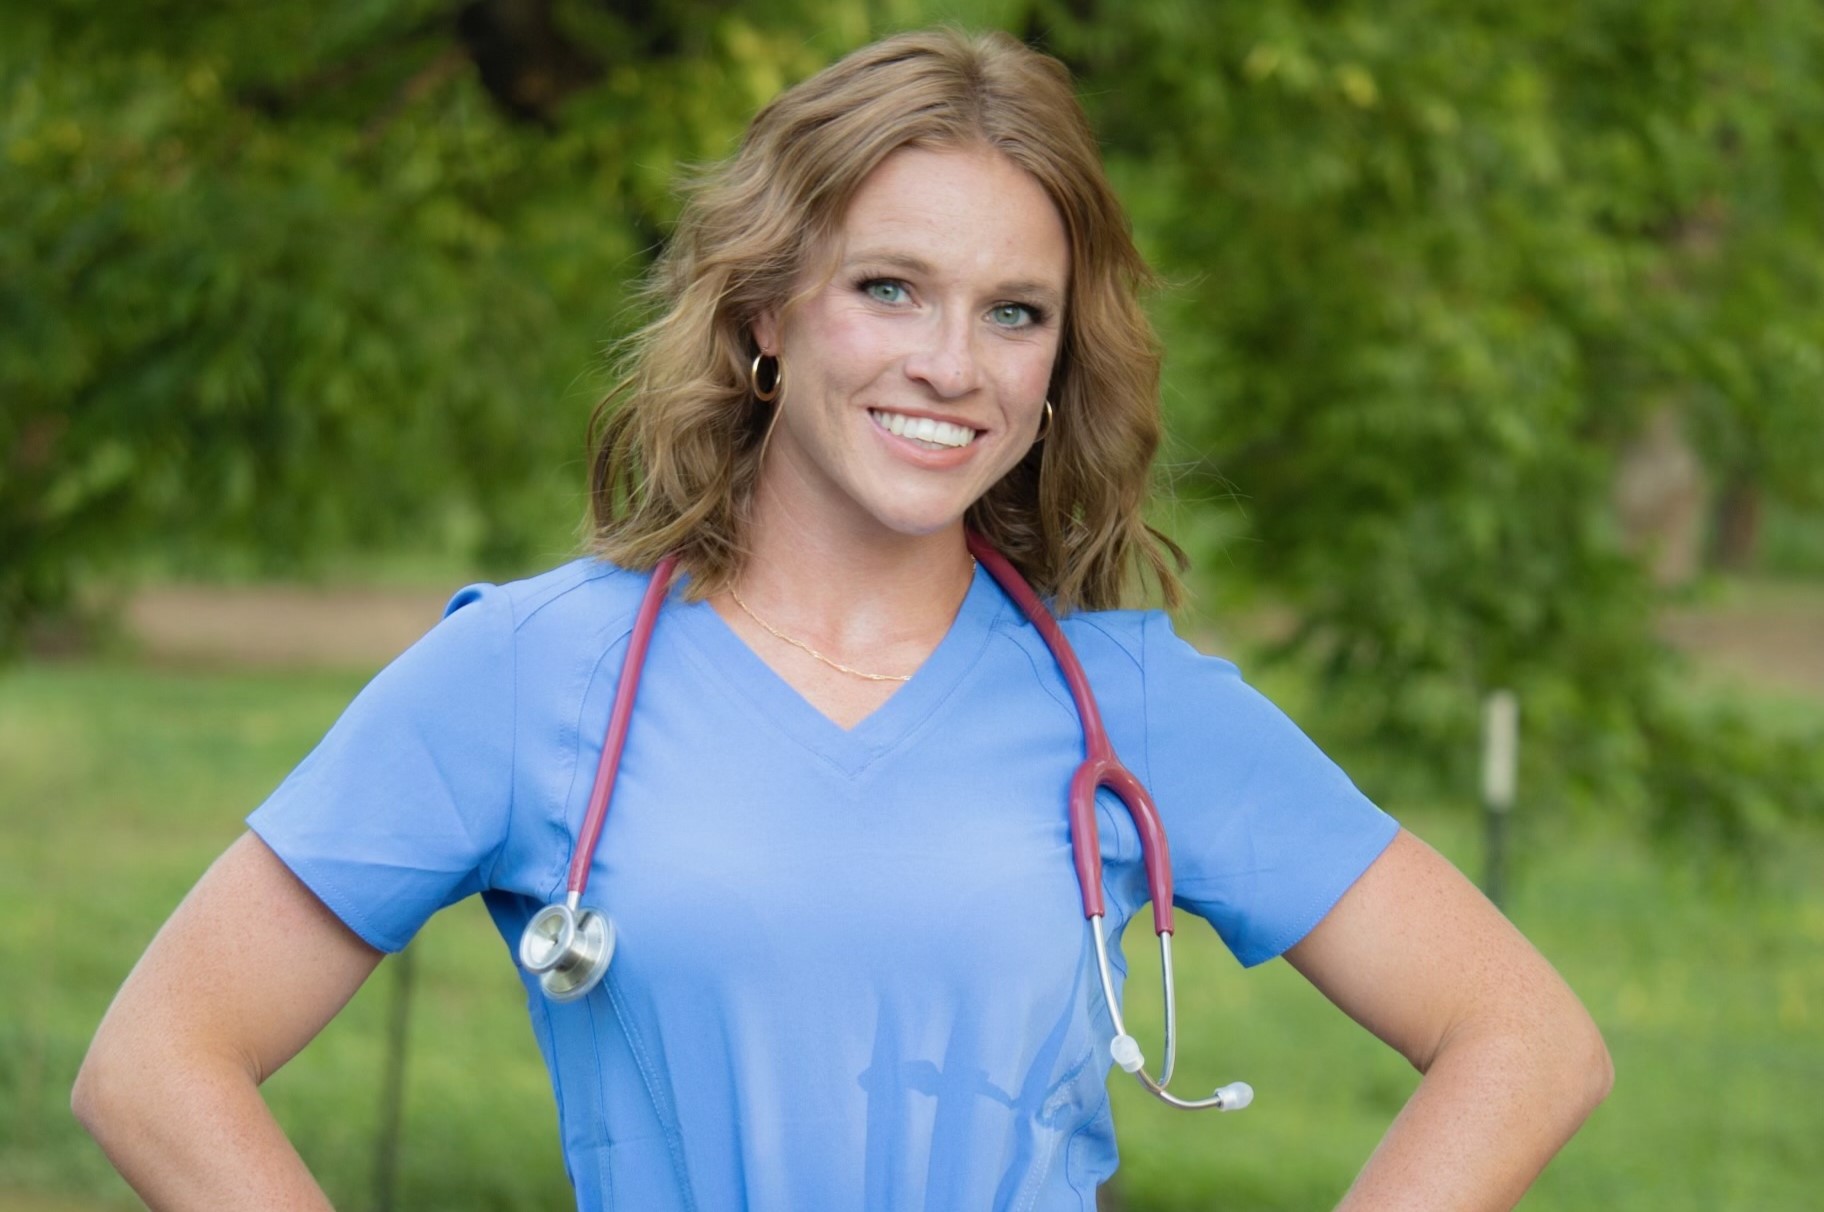 Madelin Whelpley wearing bright blue scrubs and smiling with her hands on her hips. A stethoscope hangs around her neck as she stand in front of some green trees.